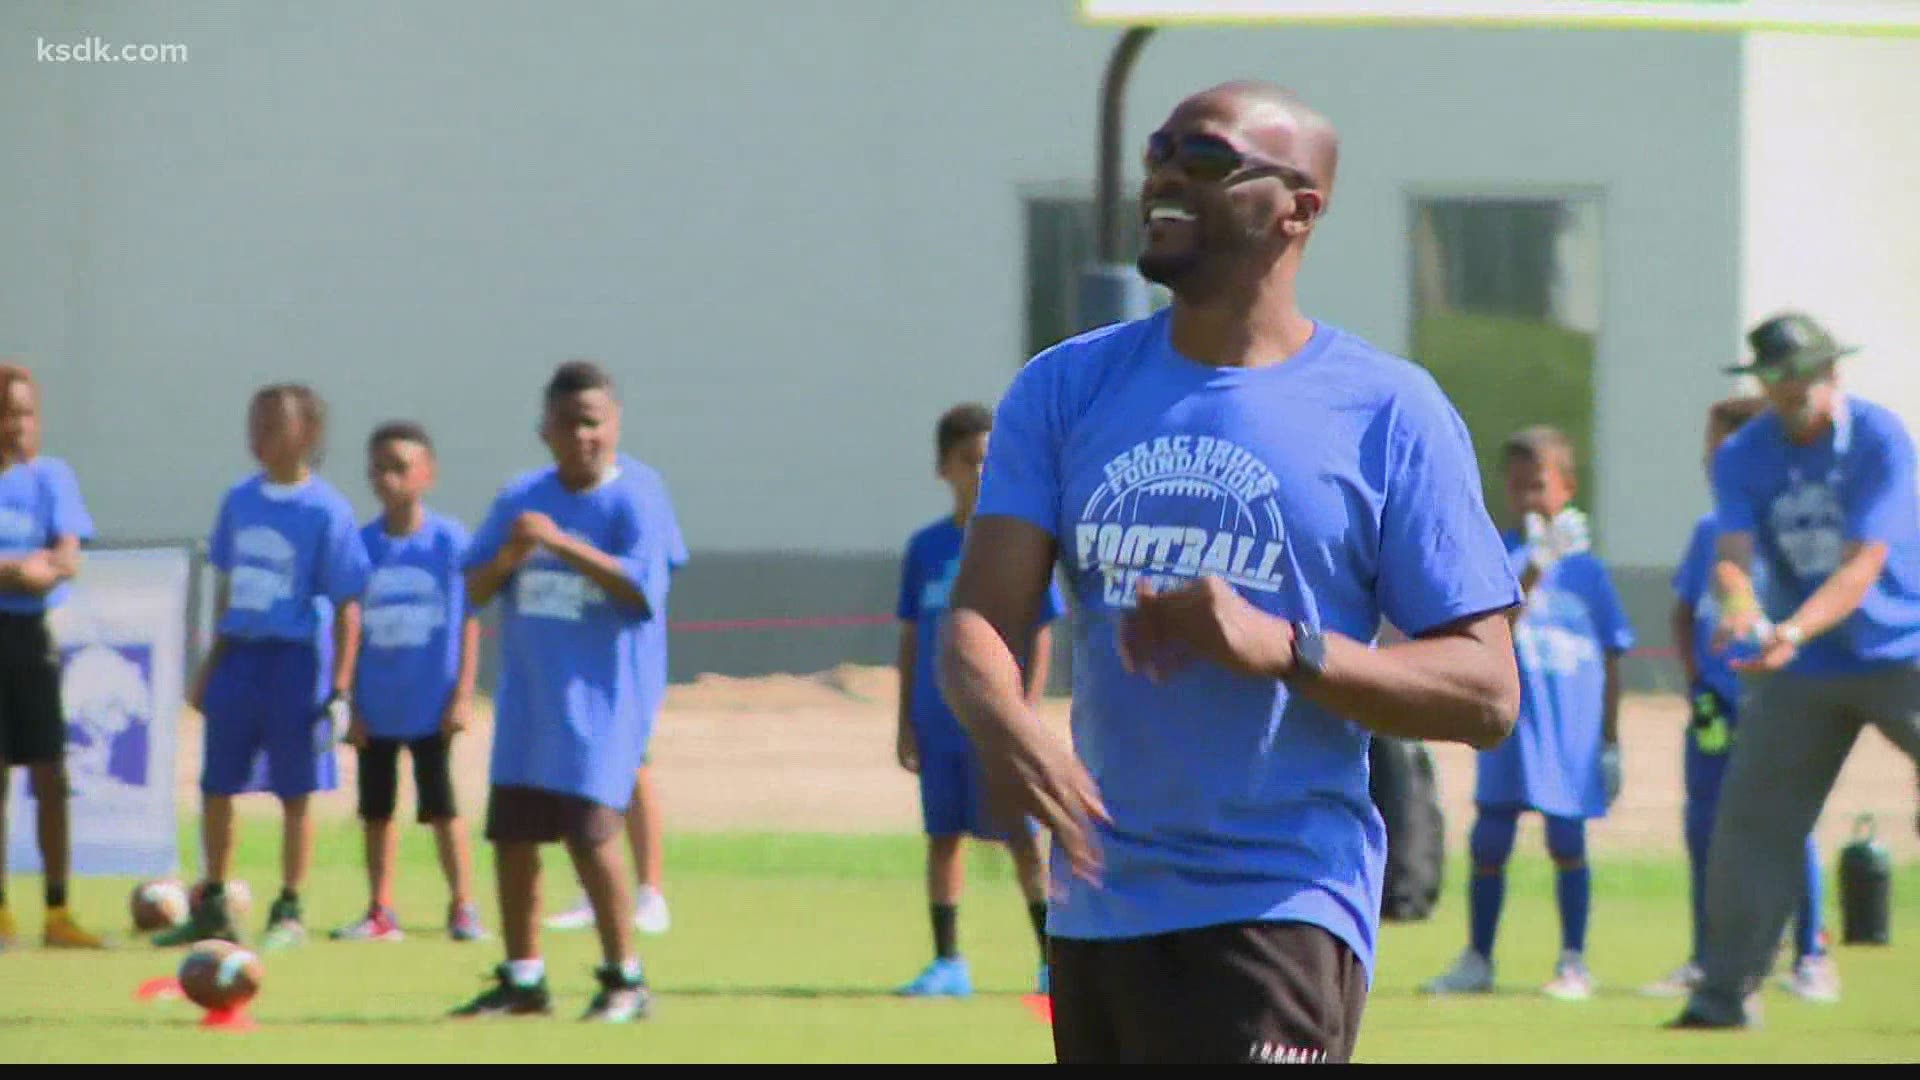 Rams Hall of Fame receiver says hosting his annual youth football camp is the least he can do